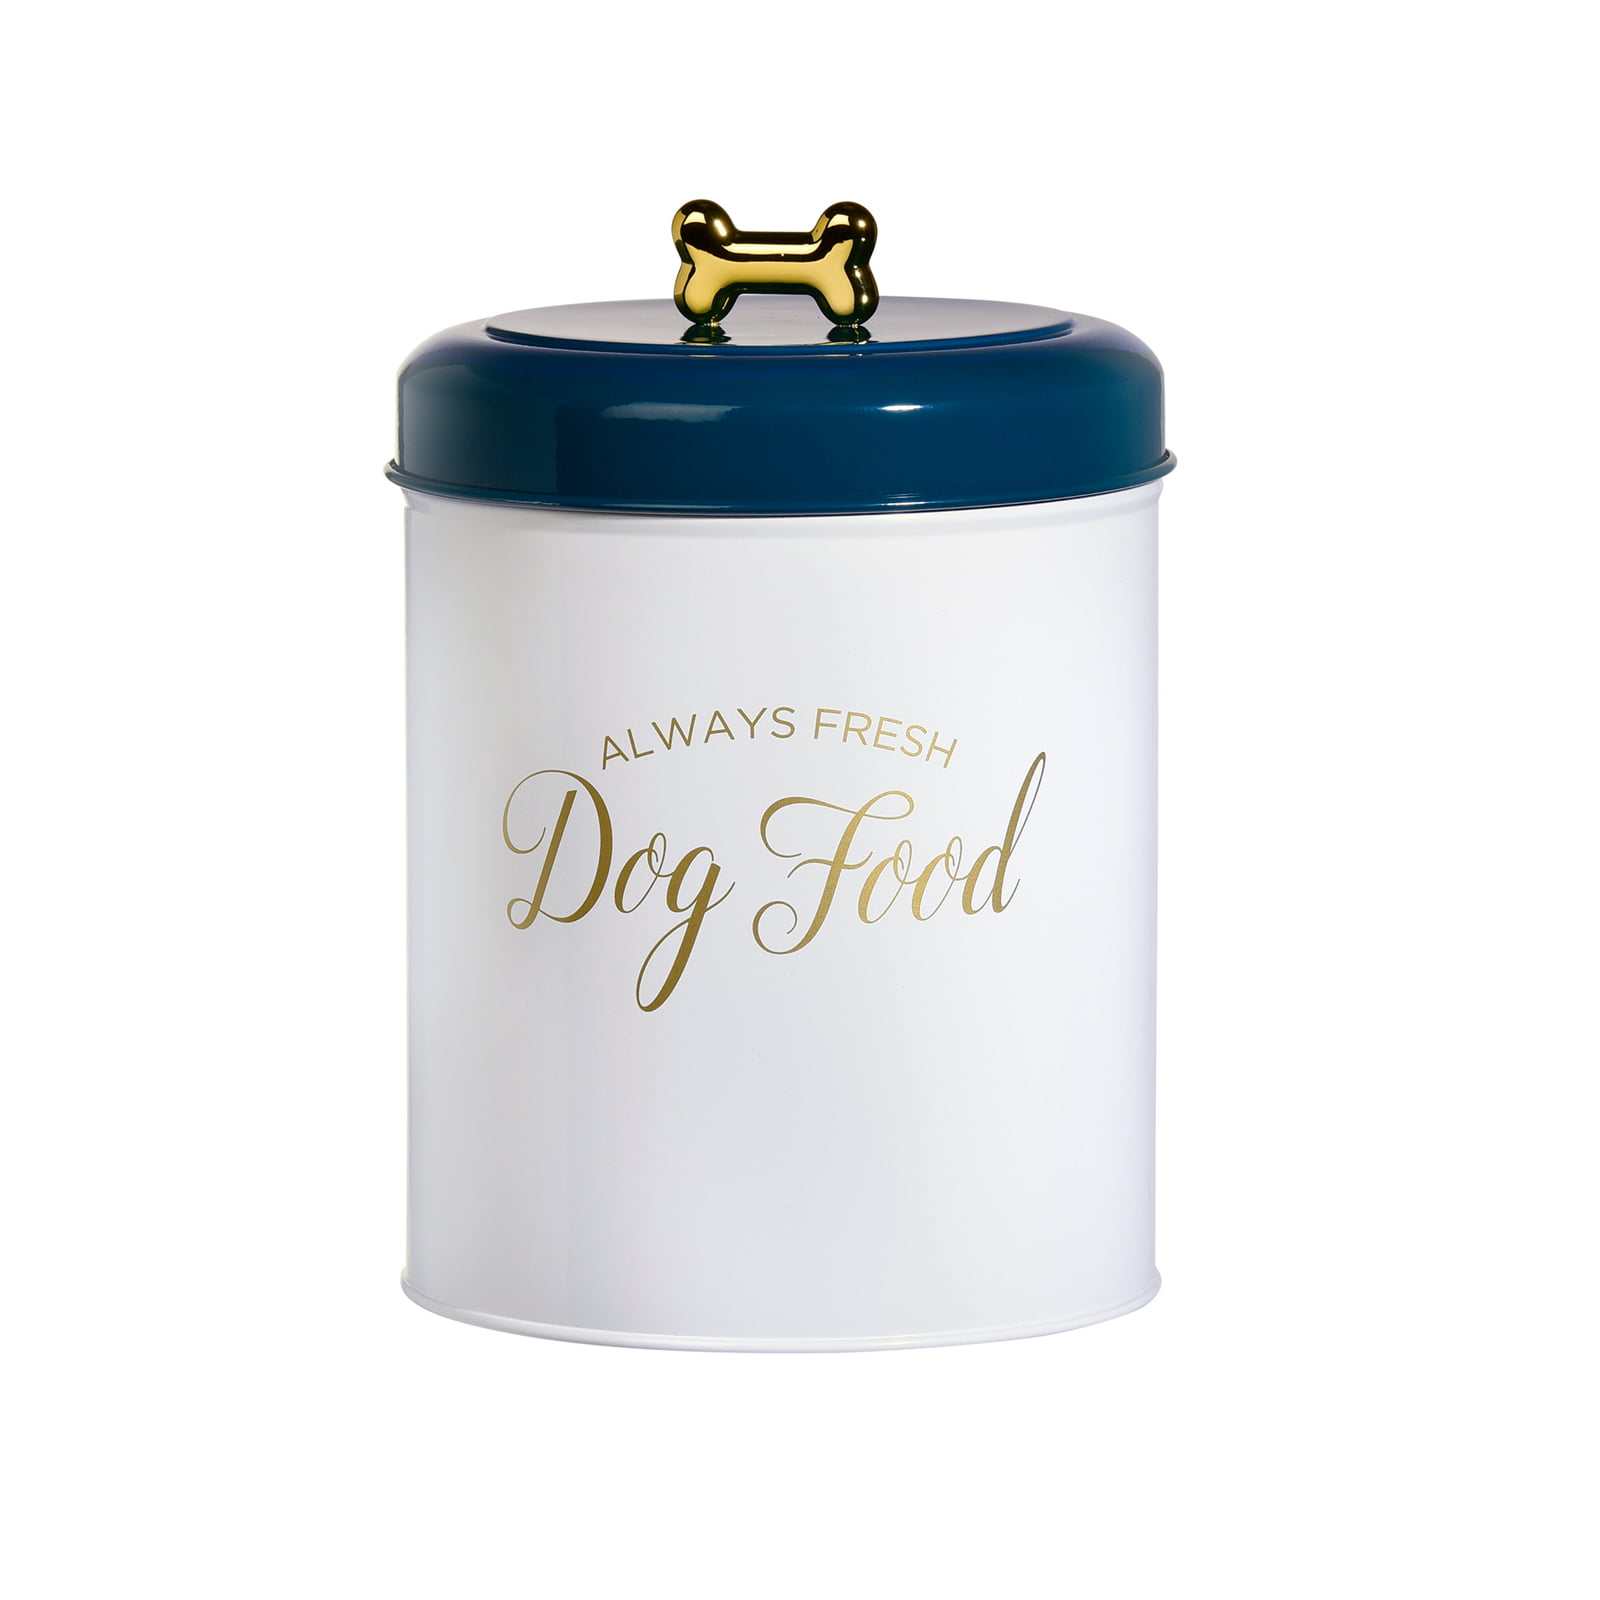 Decorative Hand Made Hammered Finish Metal Treats Storage Container Amici Pet Rosie XL Canister 104 Ounce Capacity 